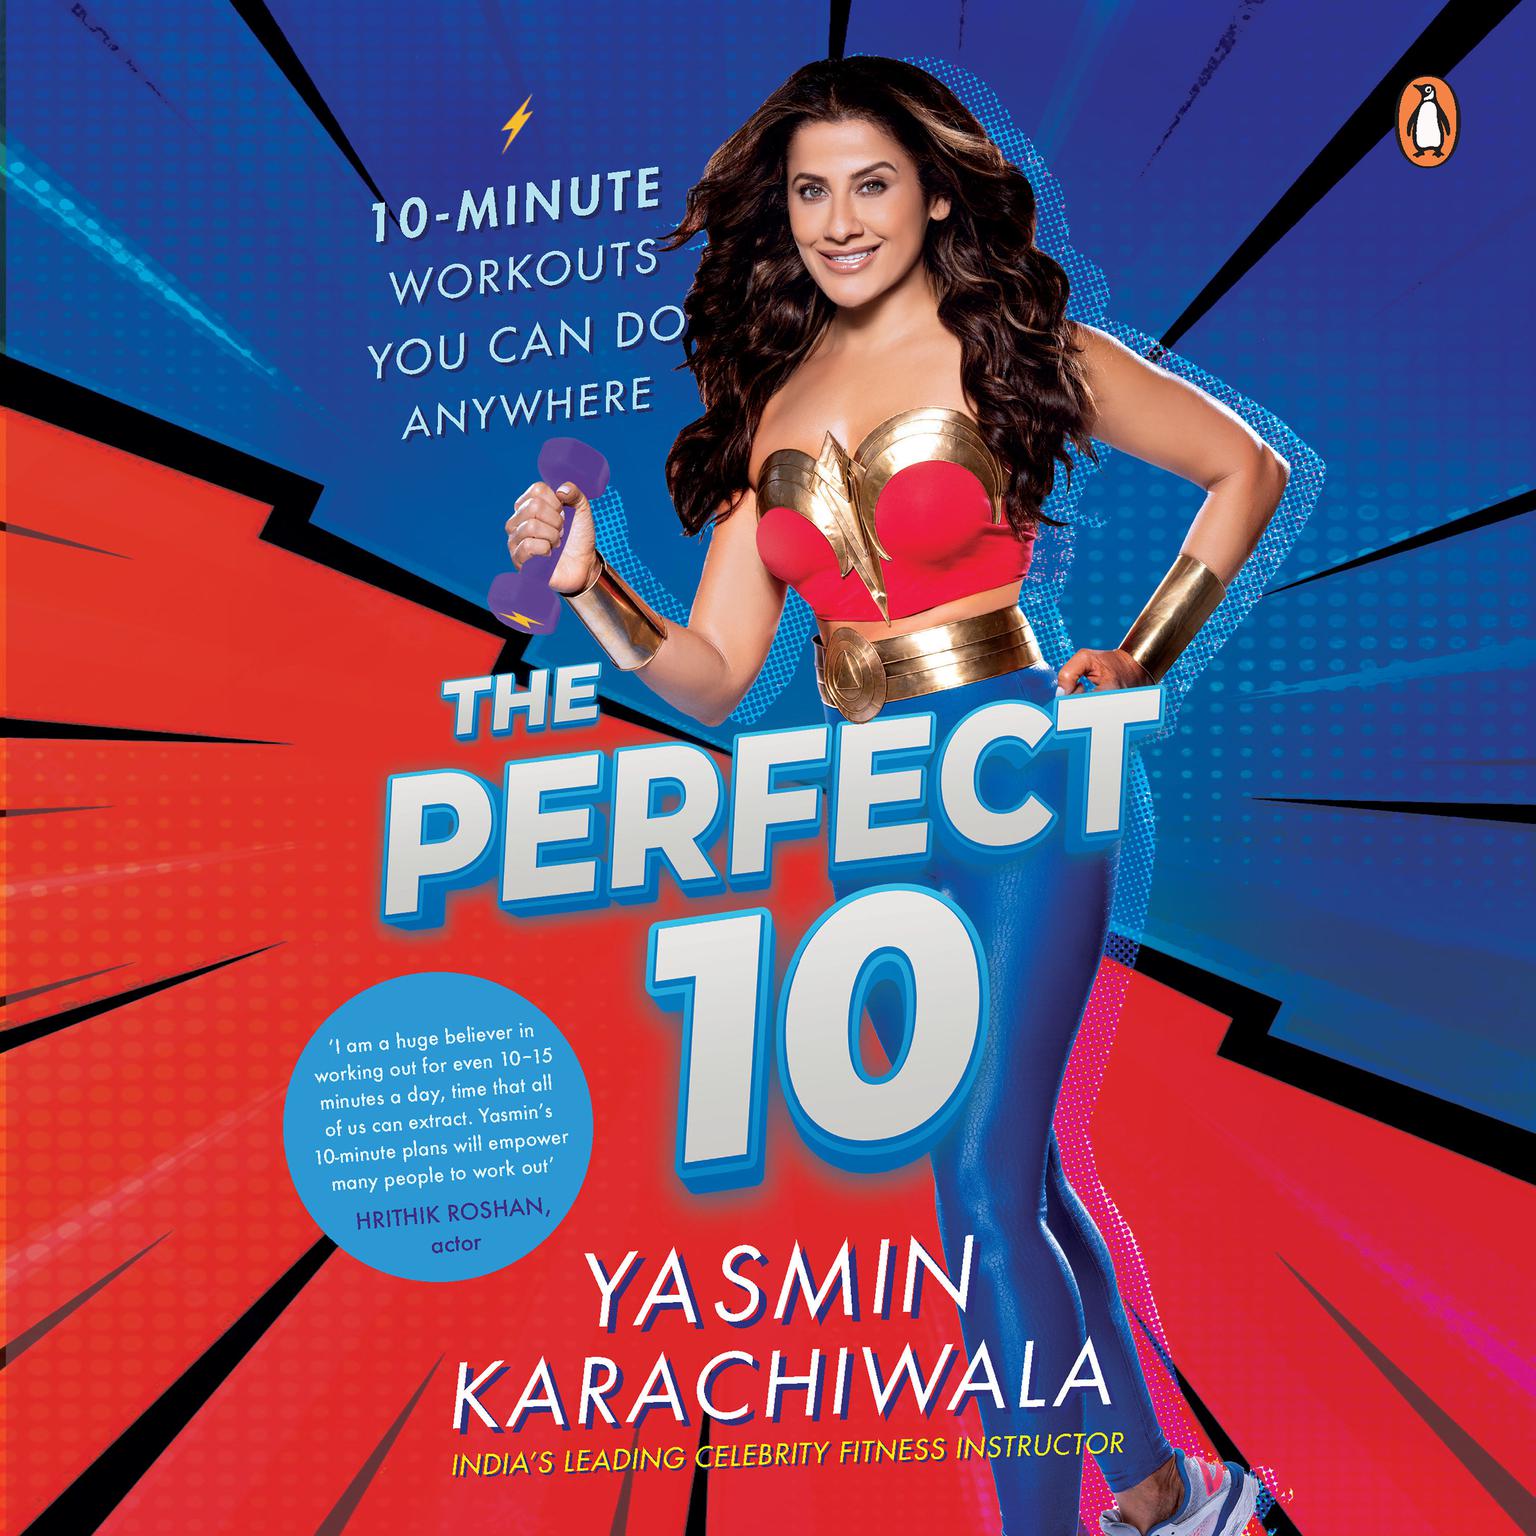 The Perfect 10: 10-Minute Workouts You Can Do Anywhere Audiobook, by Yasmin Karachiwala